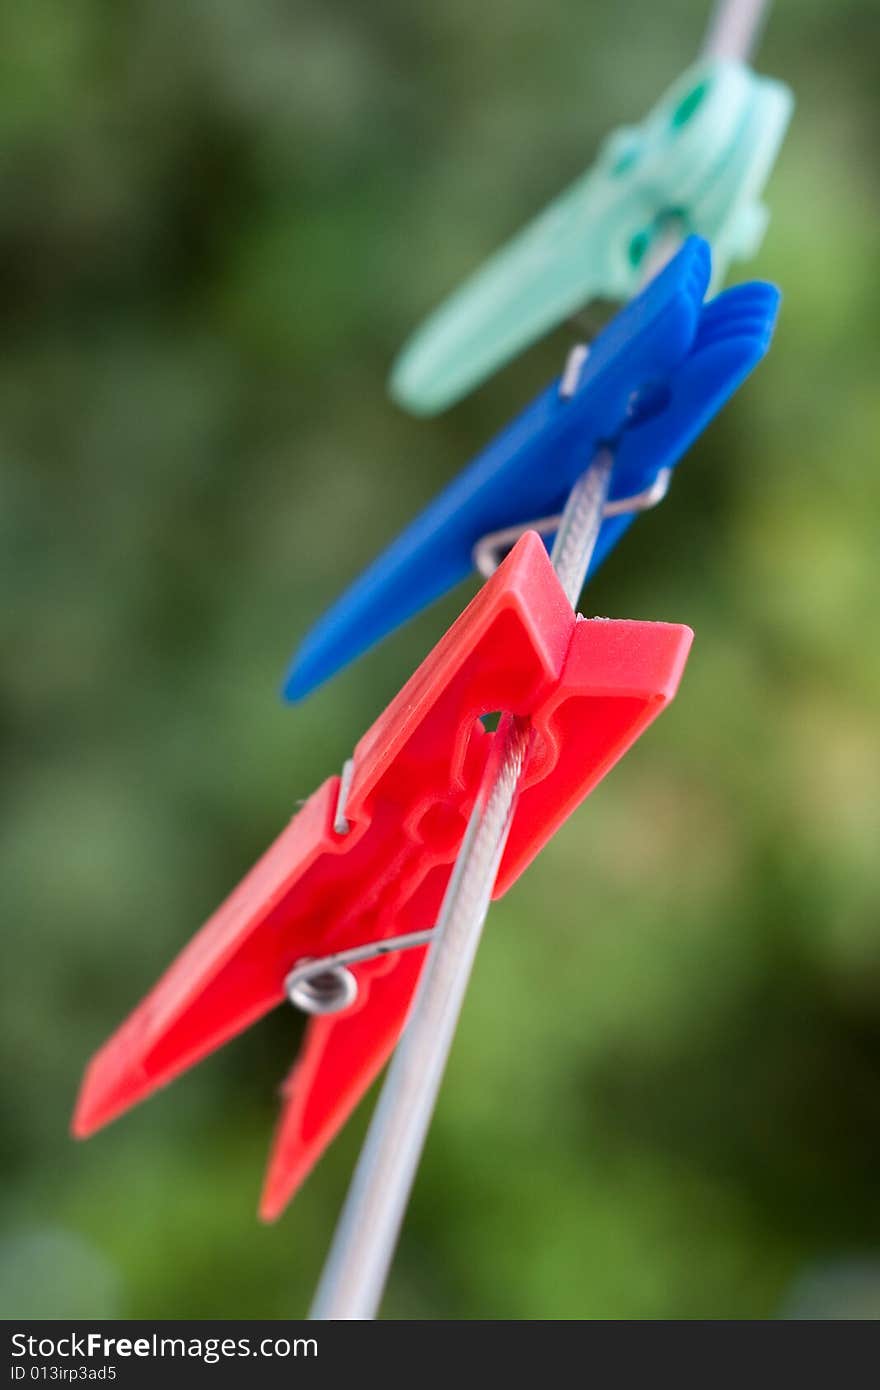 Laundry stave plastic colored clothespin